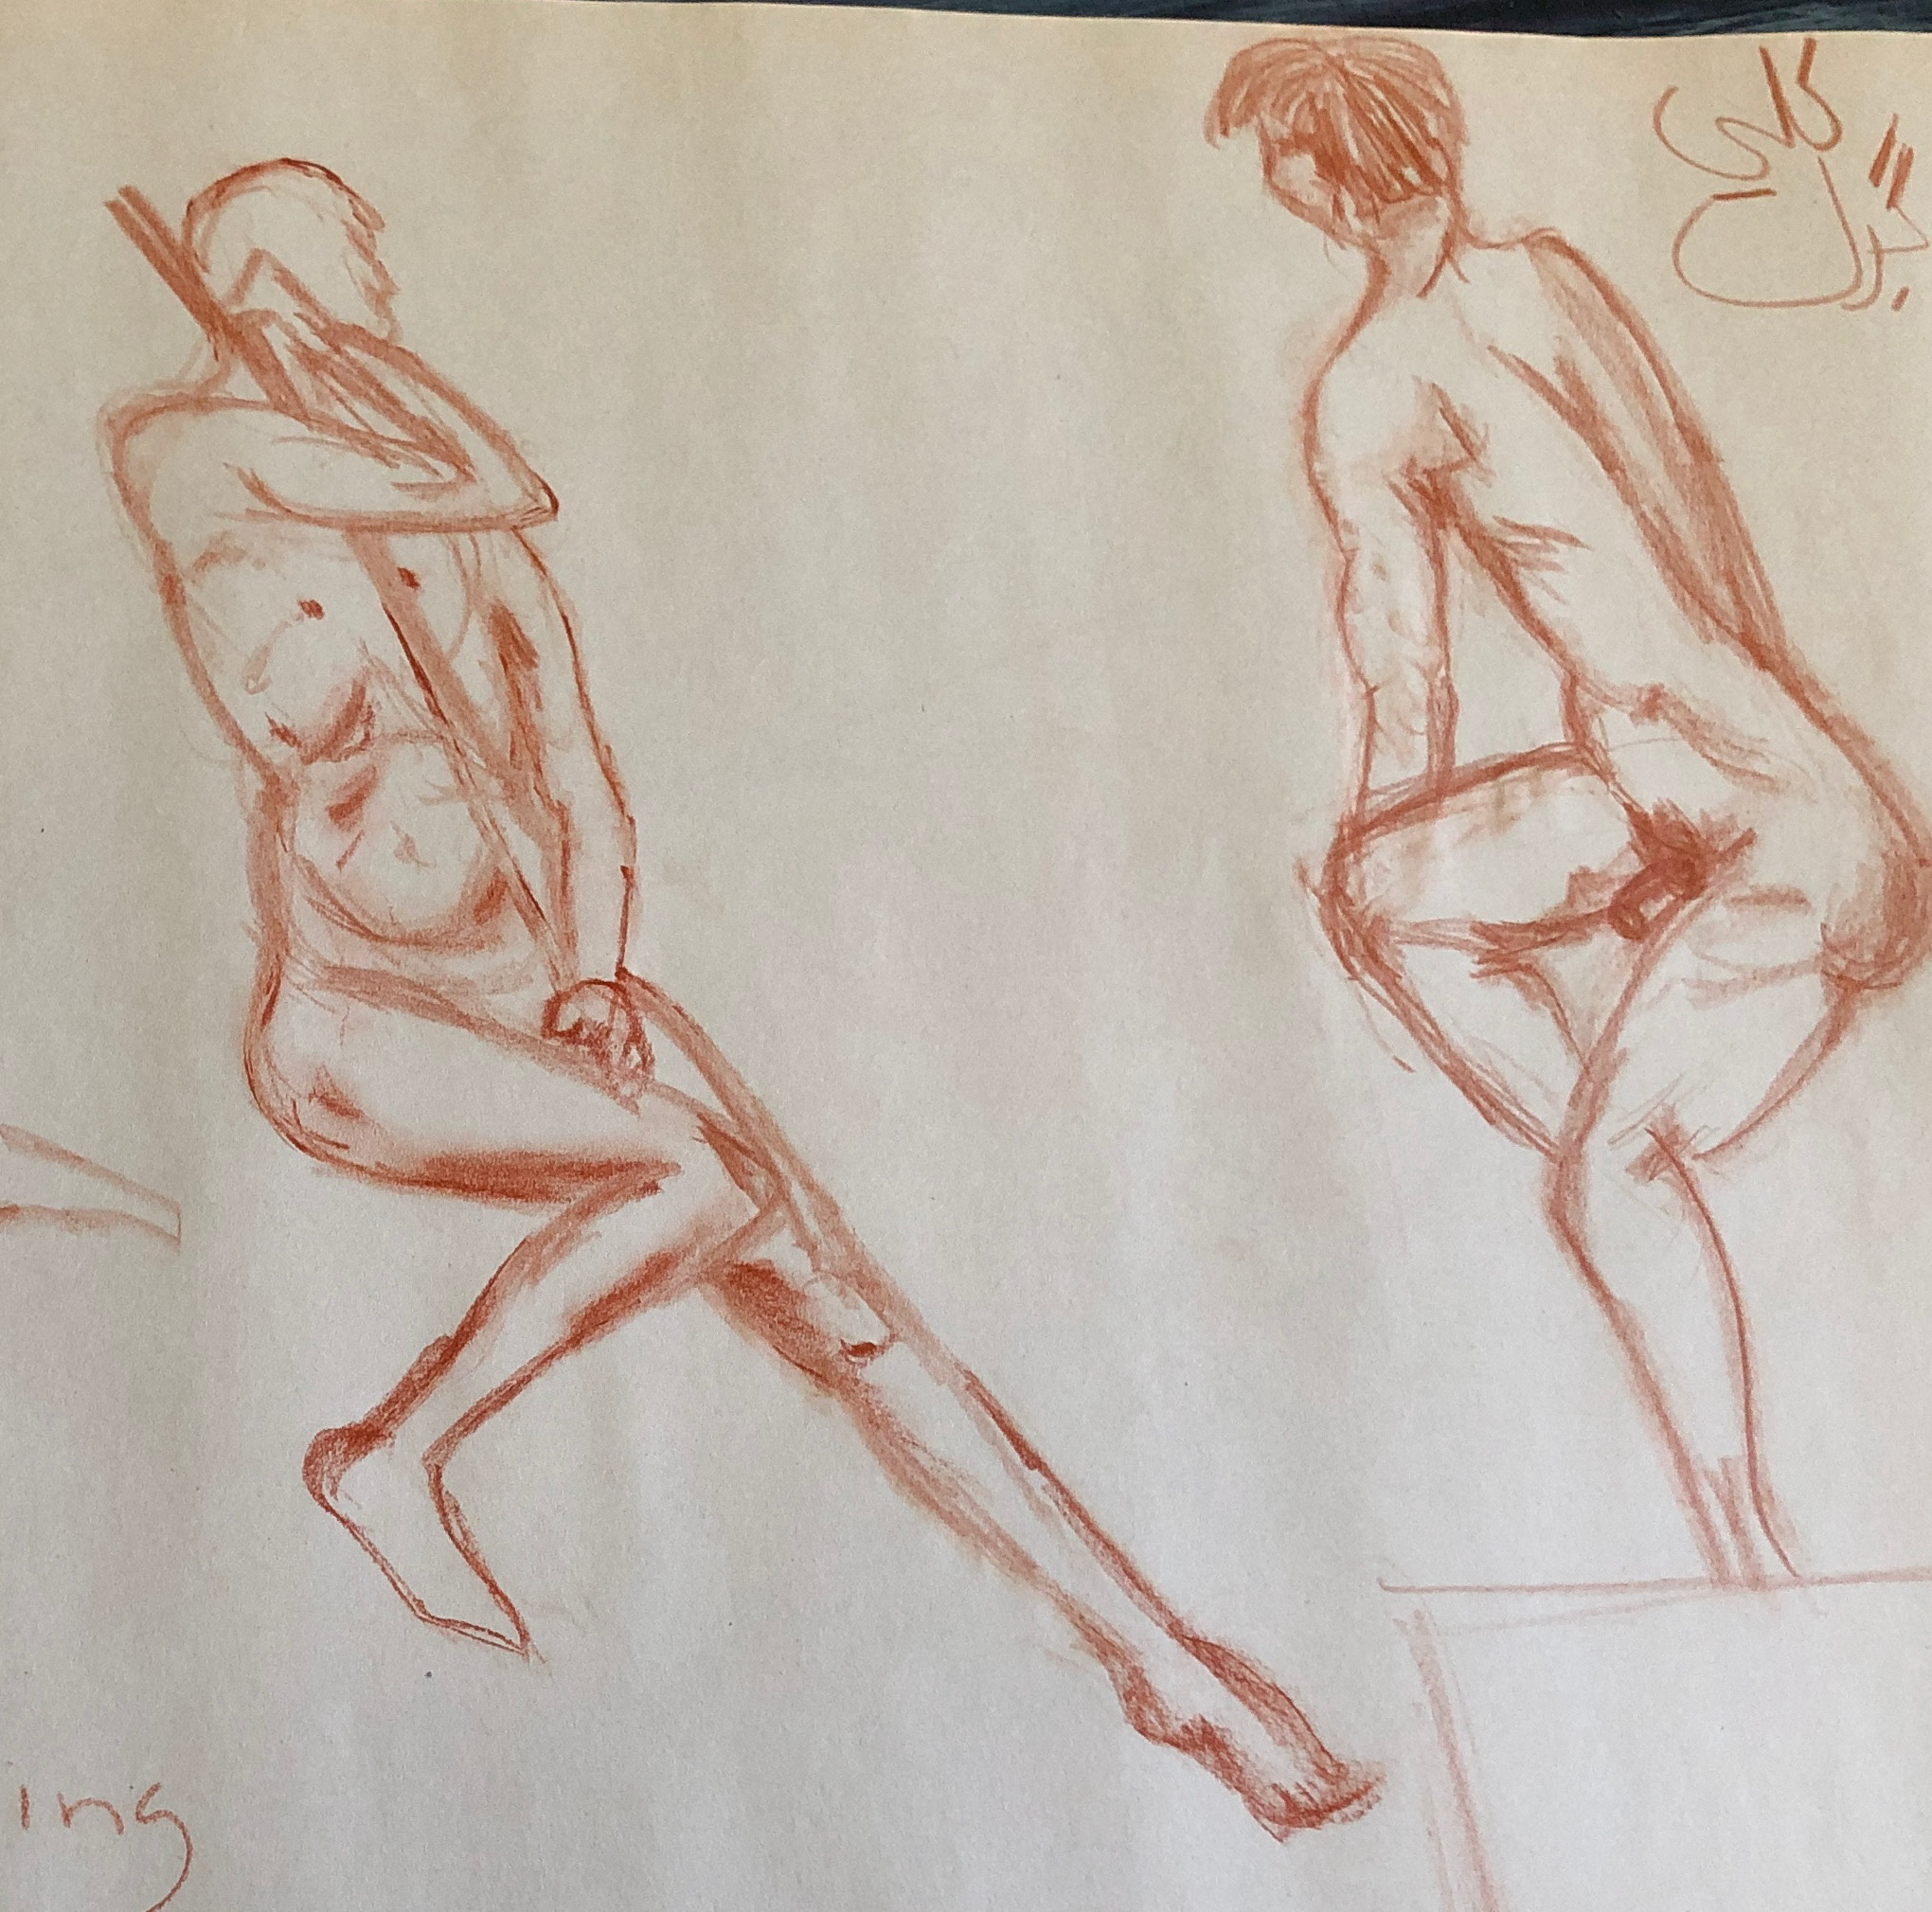 reddish-brown charcoal sketch of a naked man sitting on a stoll and twisting away from the viewer